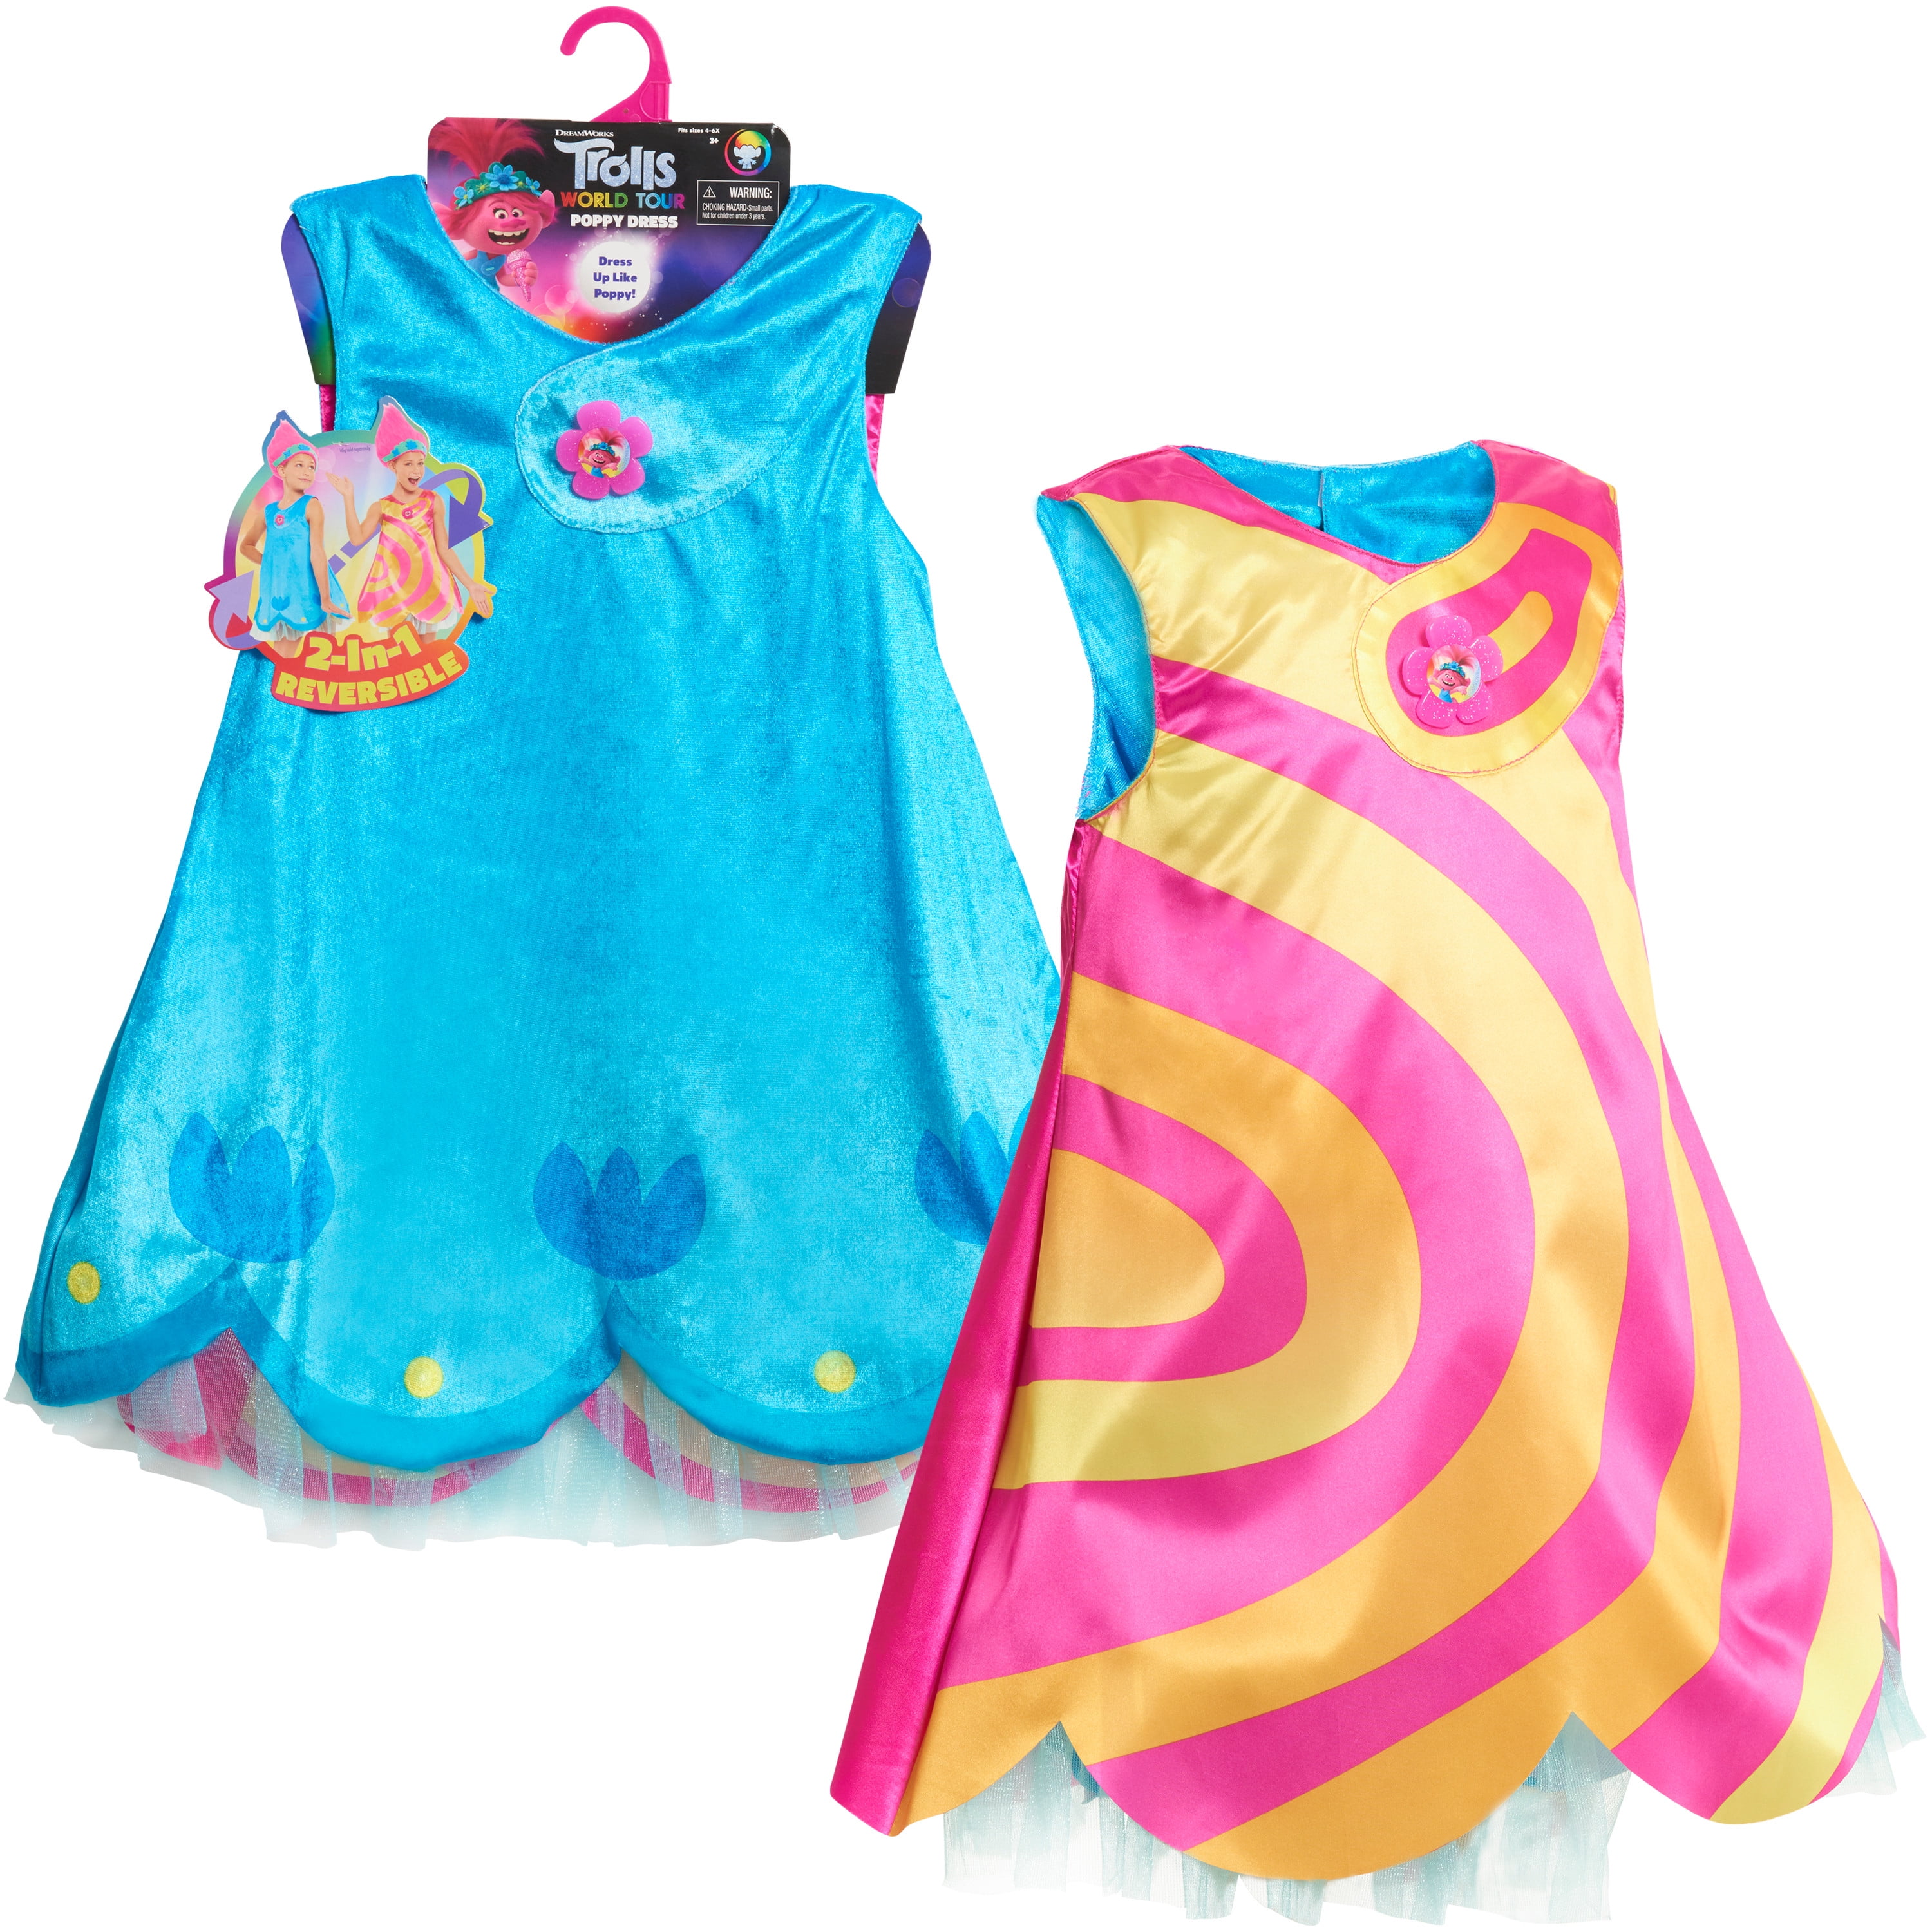 DreamWorks Trolls World Tour Roleplay Dress, Reversizble Dress Up Costume  Set, Size 4 - 6X, Kids Toys for Ages 3 Up, Gifts and Presents 